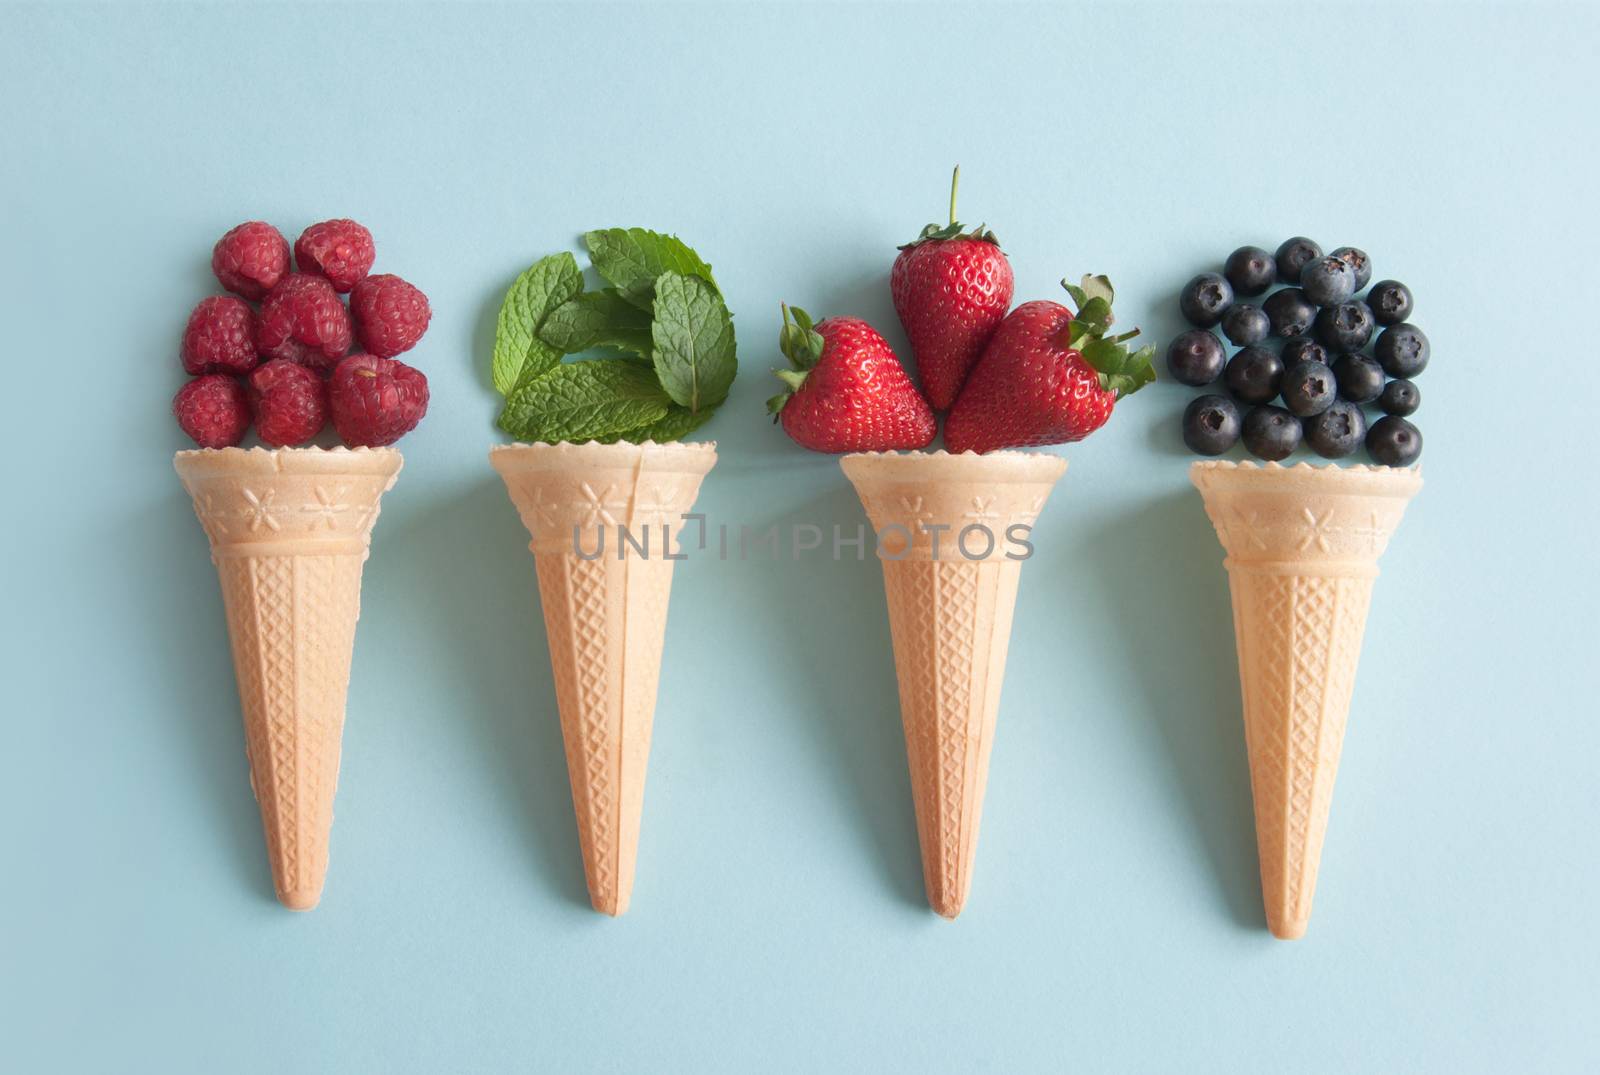 Four icecream cones with natural ingredients including berries, and mint flavors